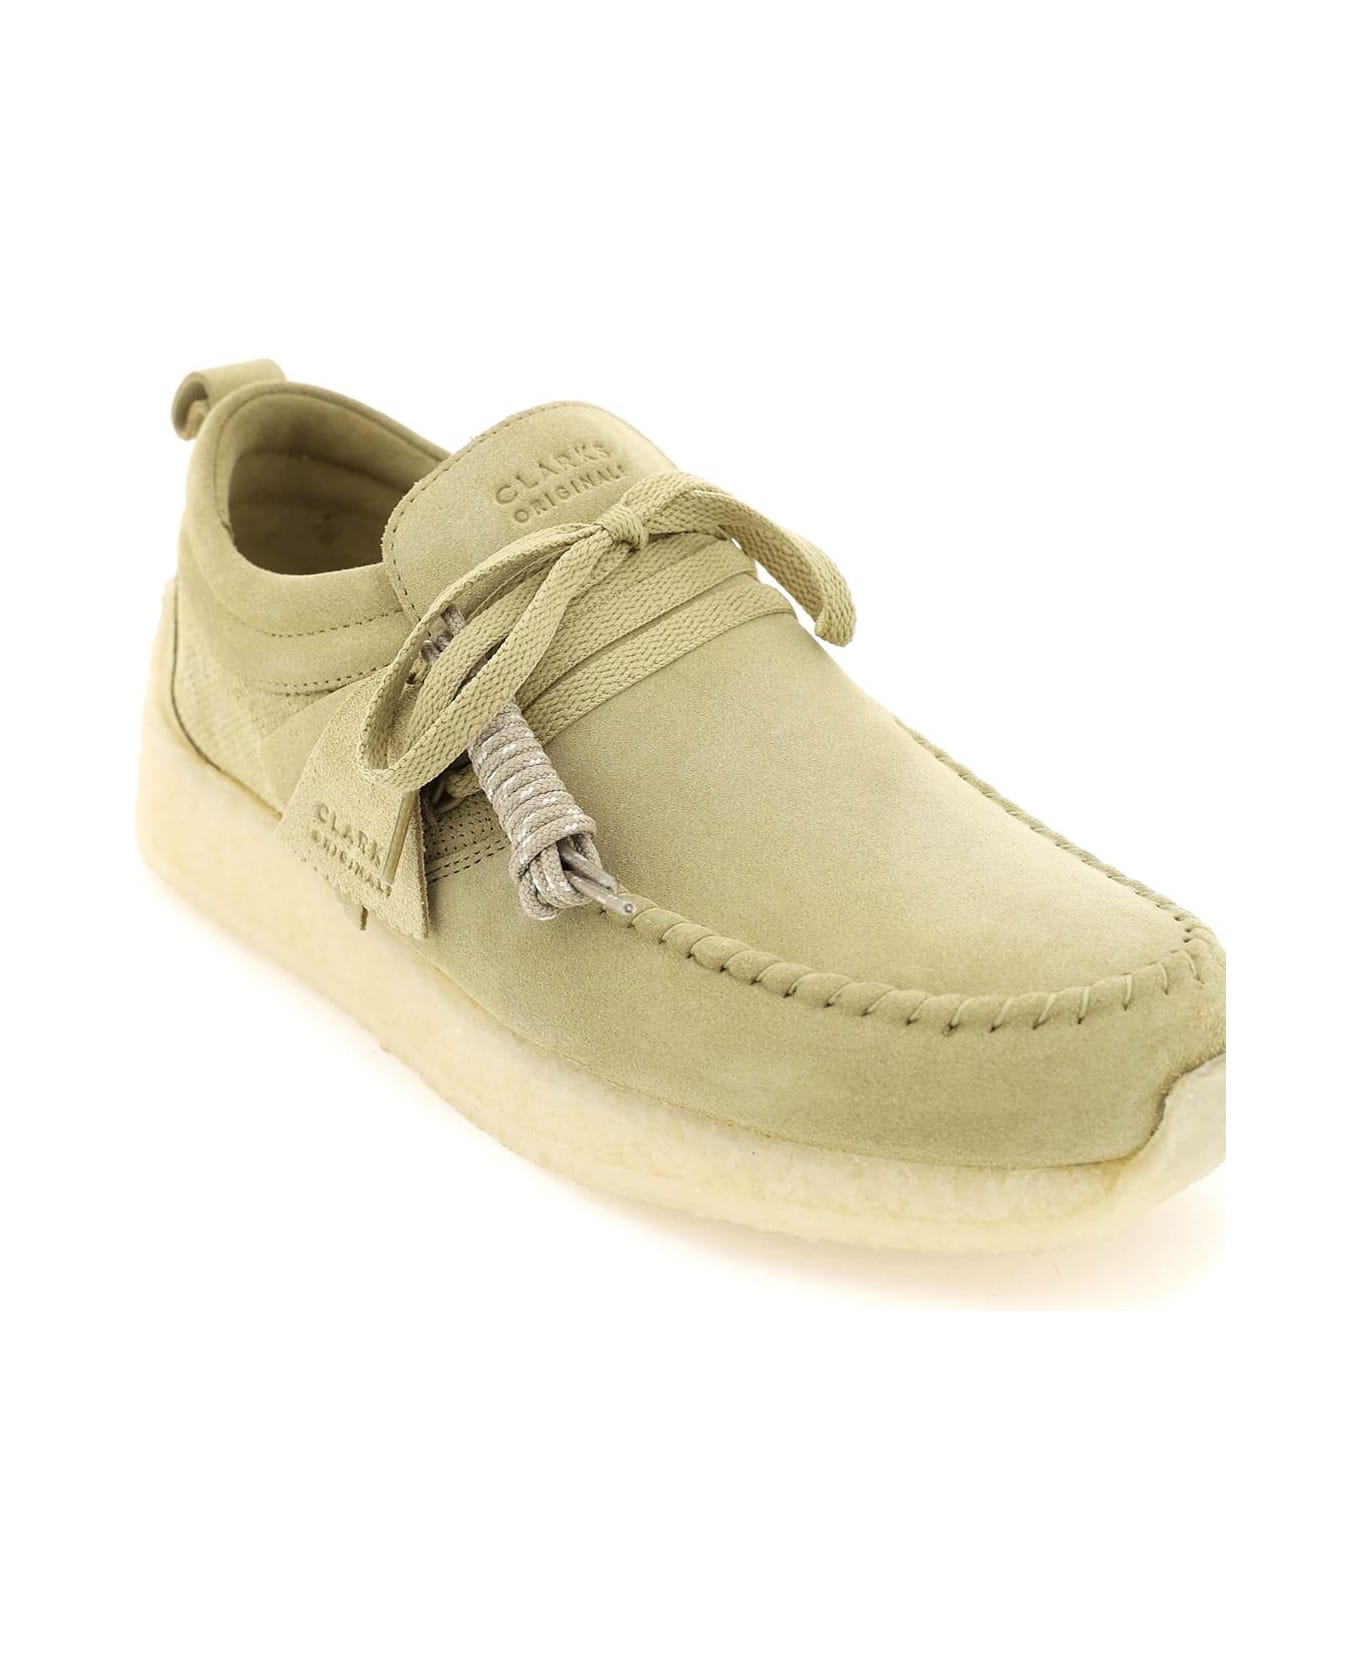 Clarks 'maycliffe' Lace-up Shoes - MAPLE (Beige)